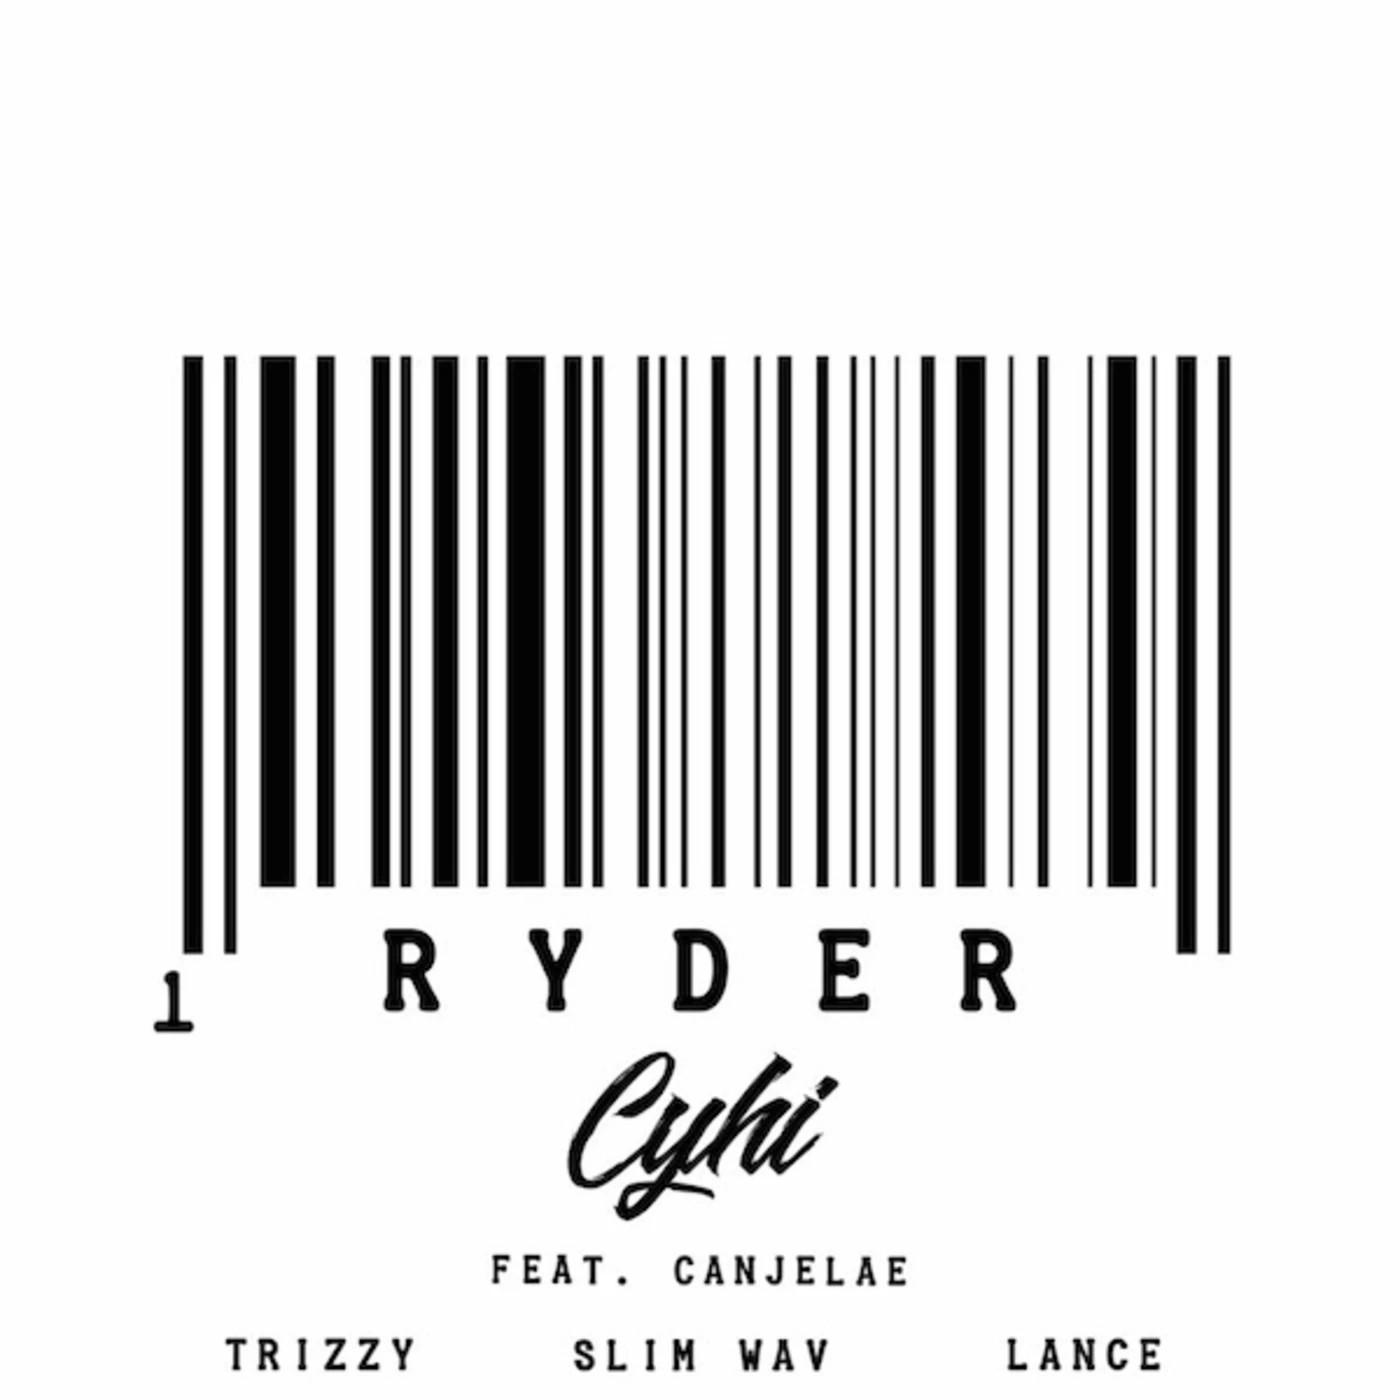 CyHi Makes Triumphant Return With Canjelae-Assisted Single “Ryder”